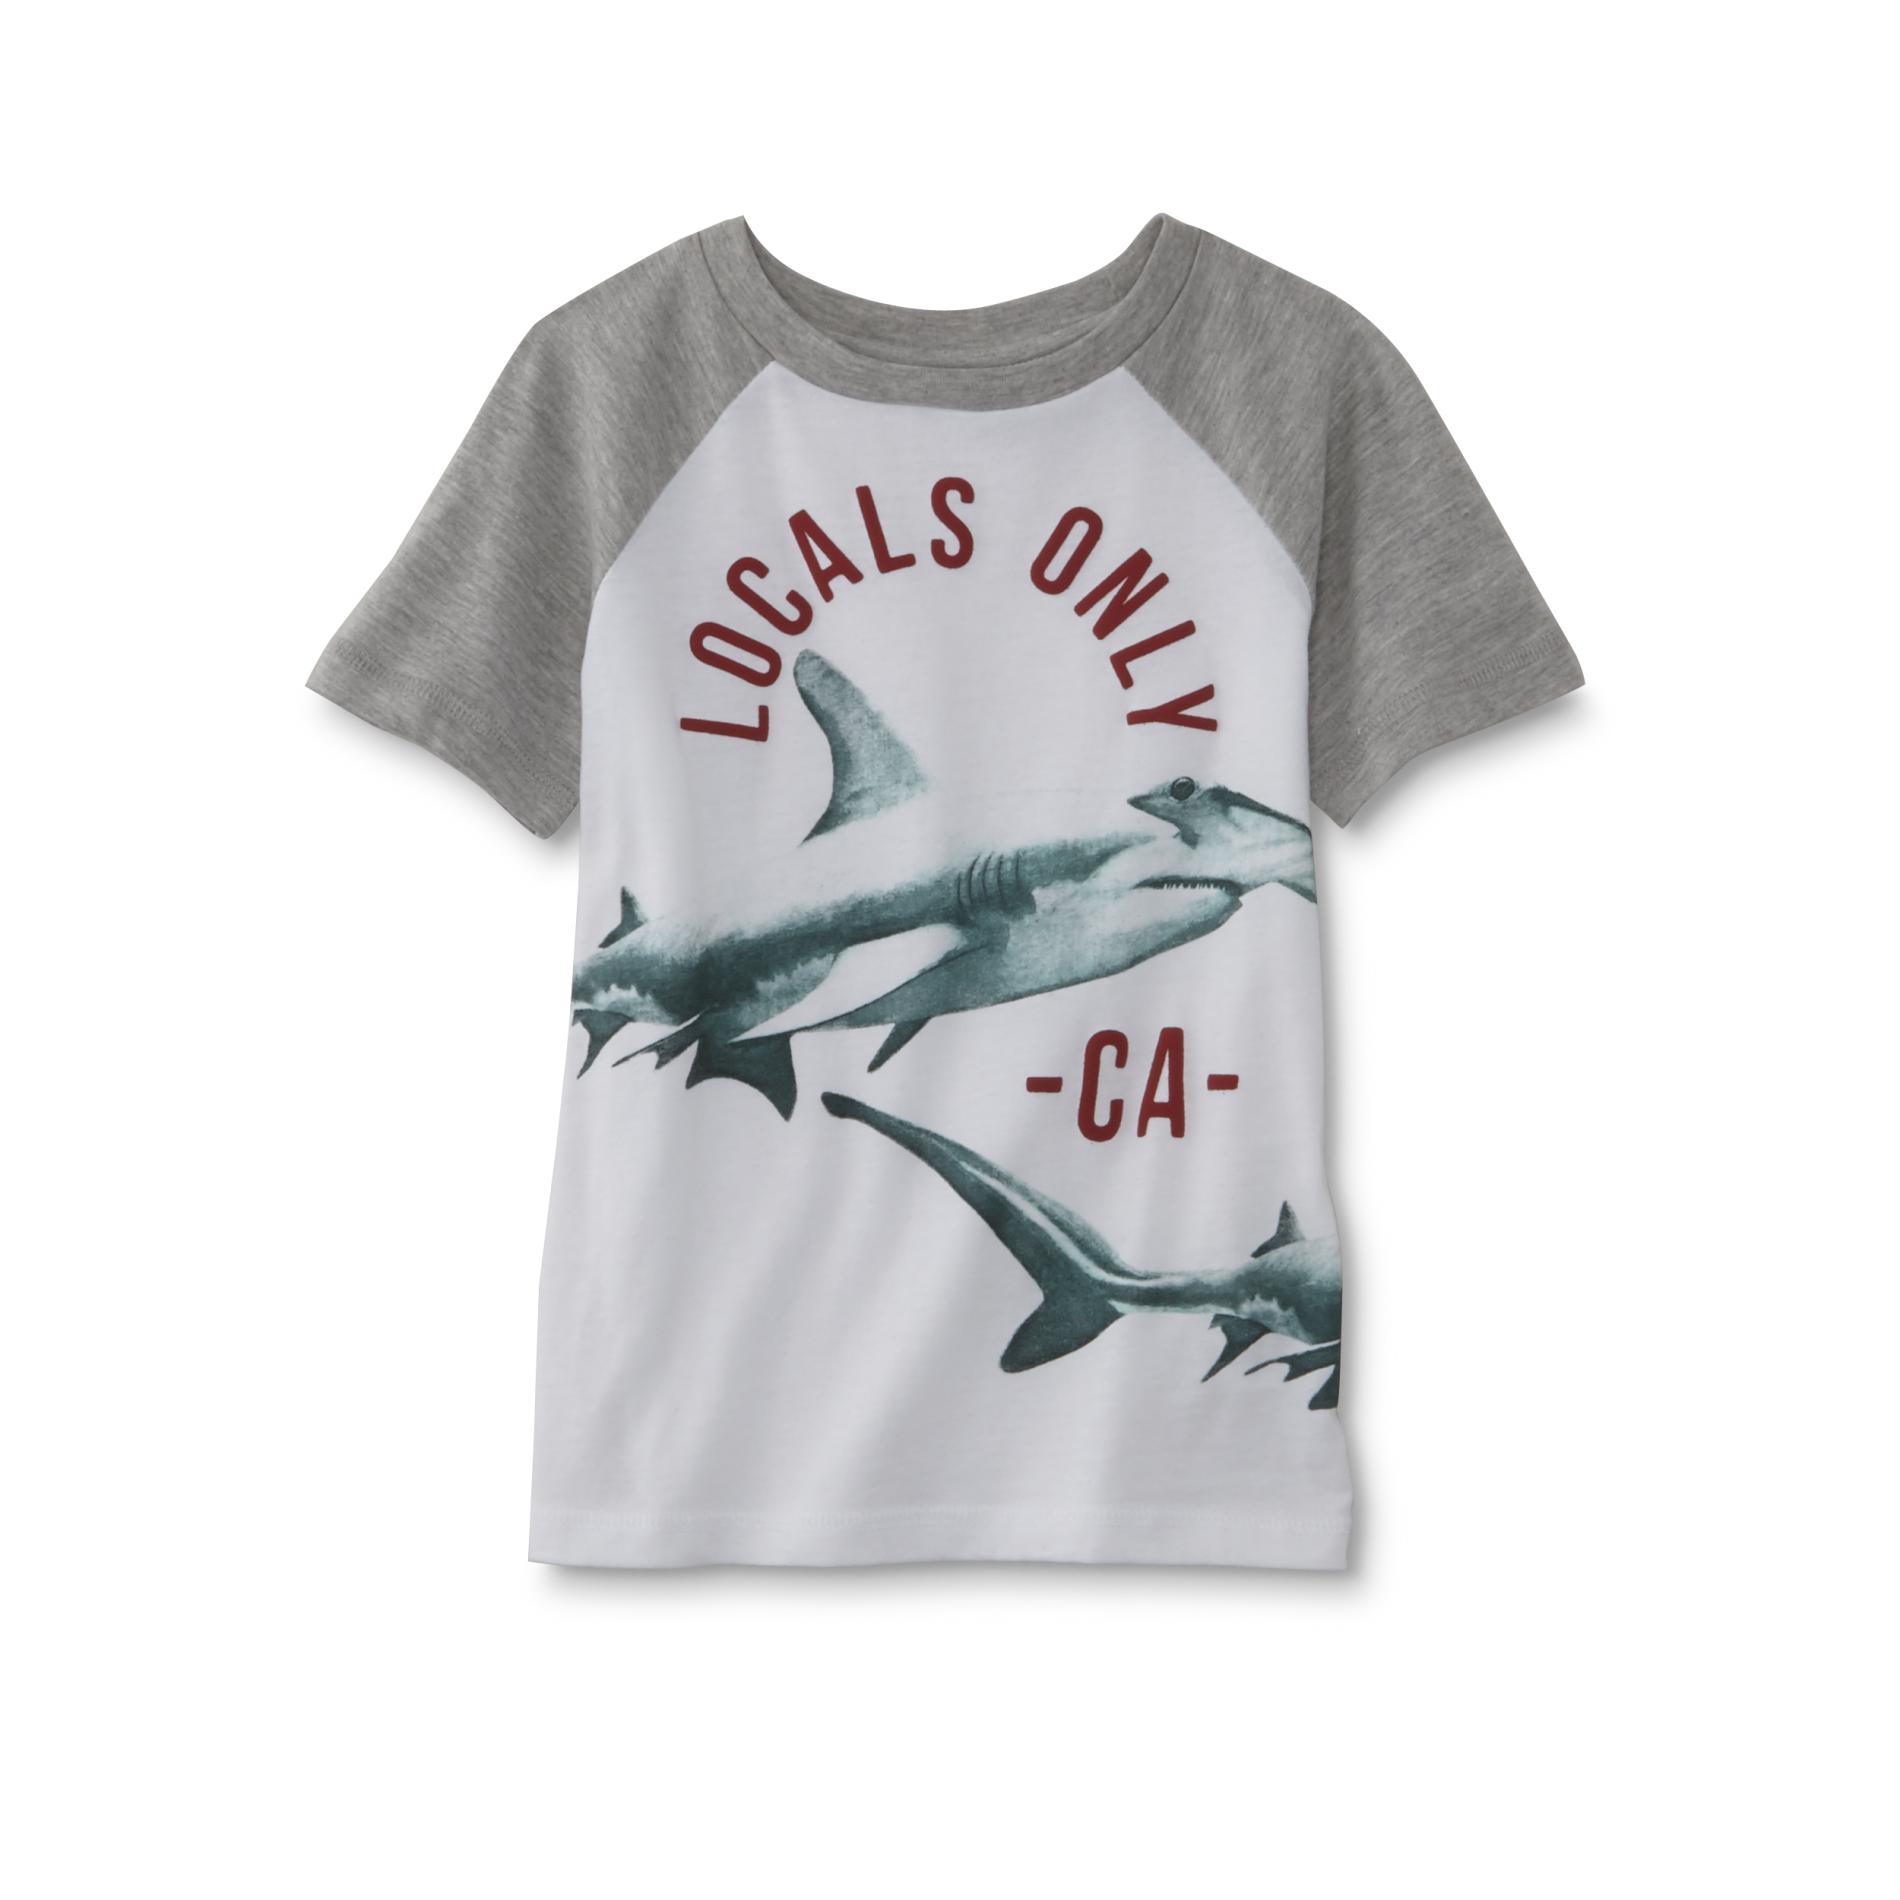 Toughskins Boys' Graphic T-Shirt - Locals Only